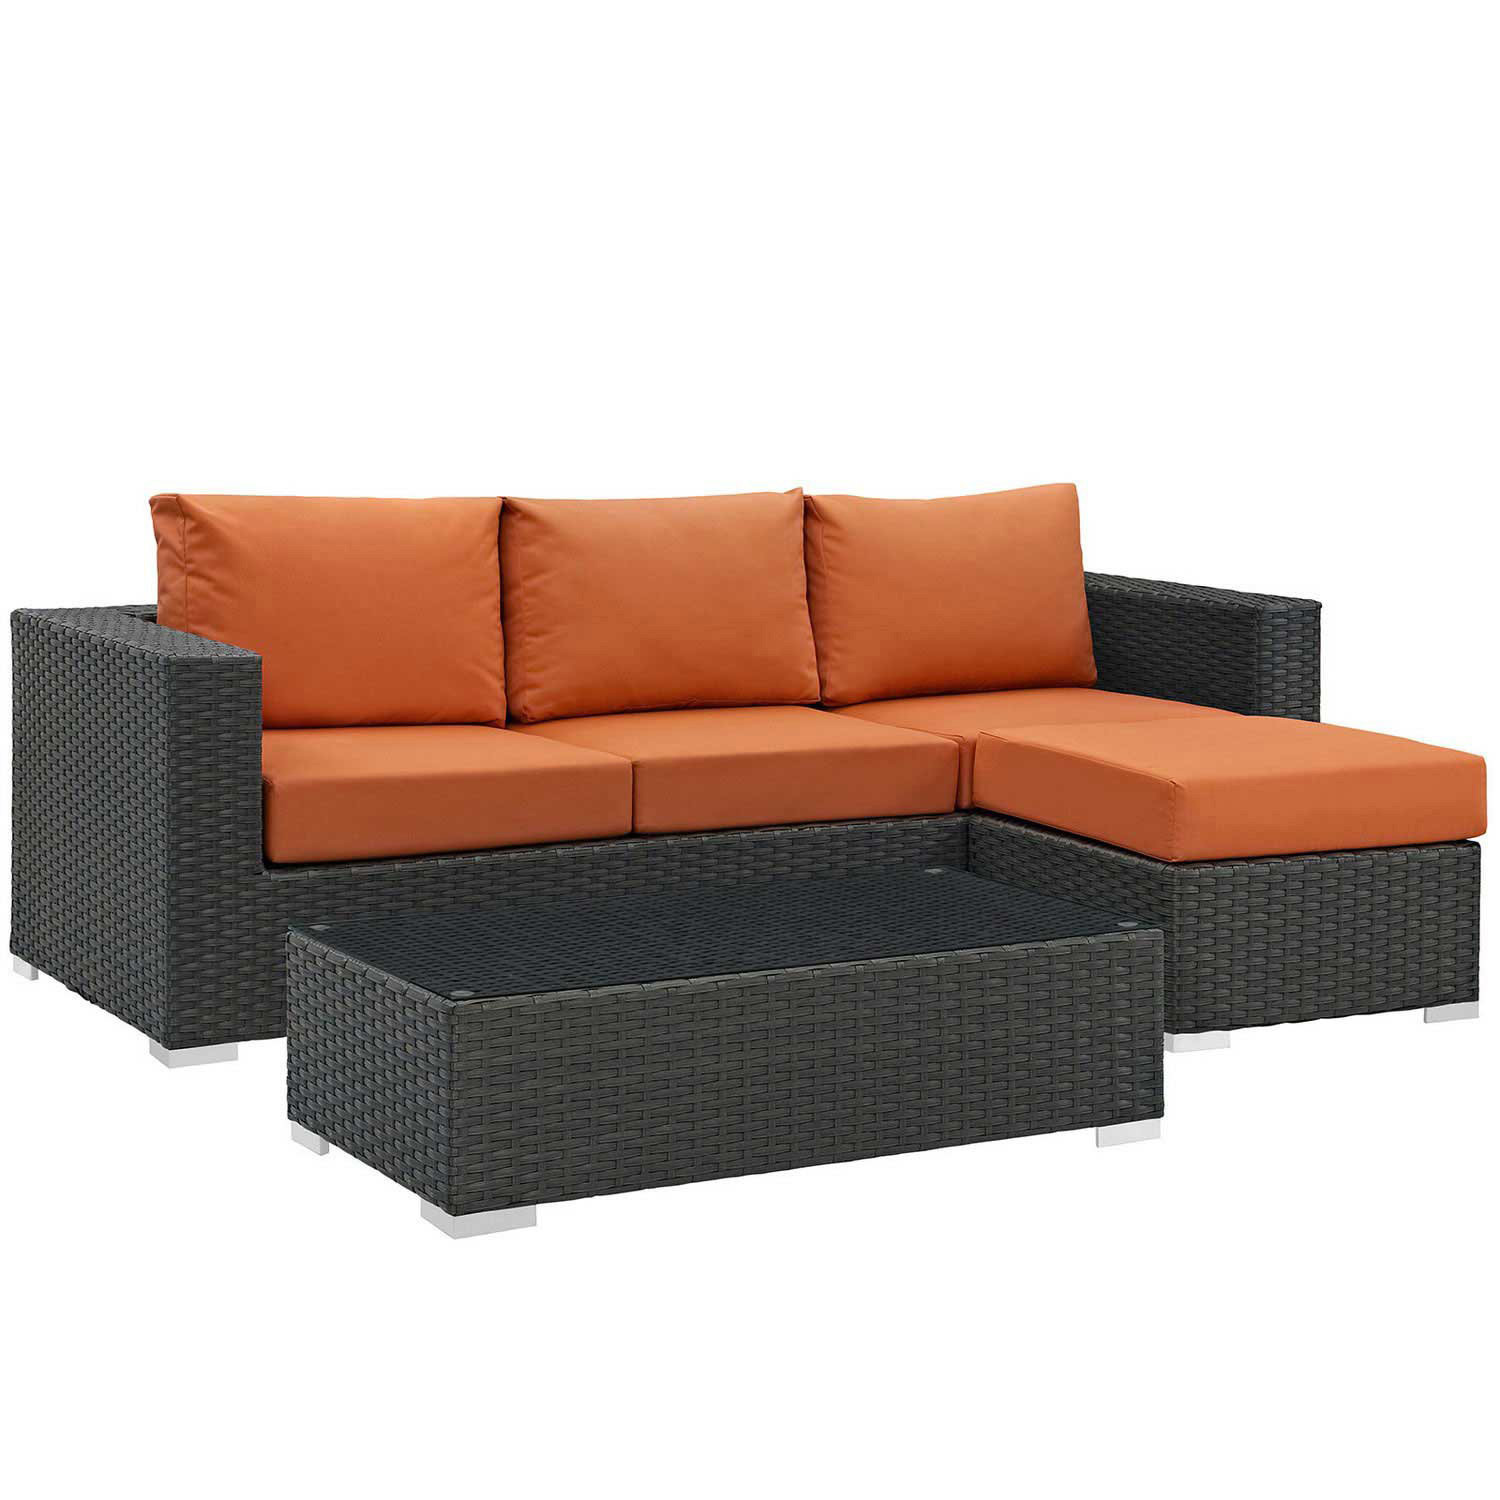 Modway Sojourn 3 Piece Outdoor Patio Sunbrella Sectional Set - Canvas Tuscan